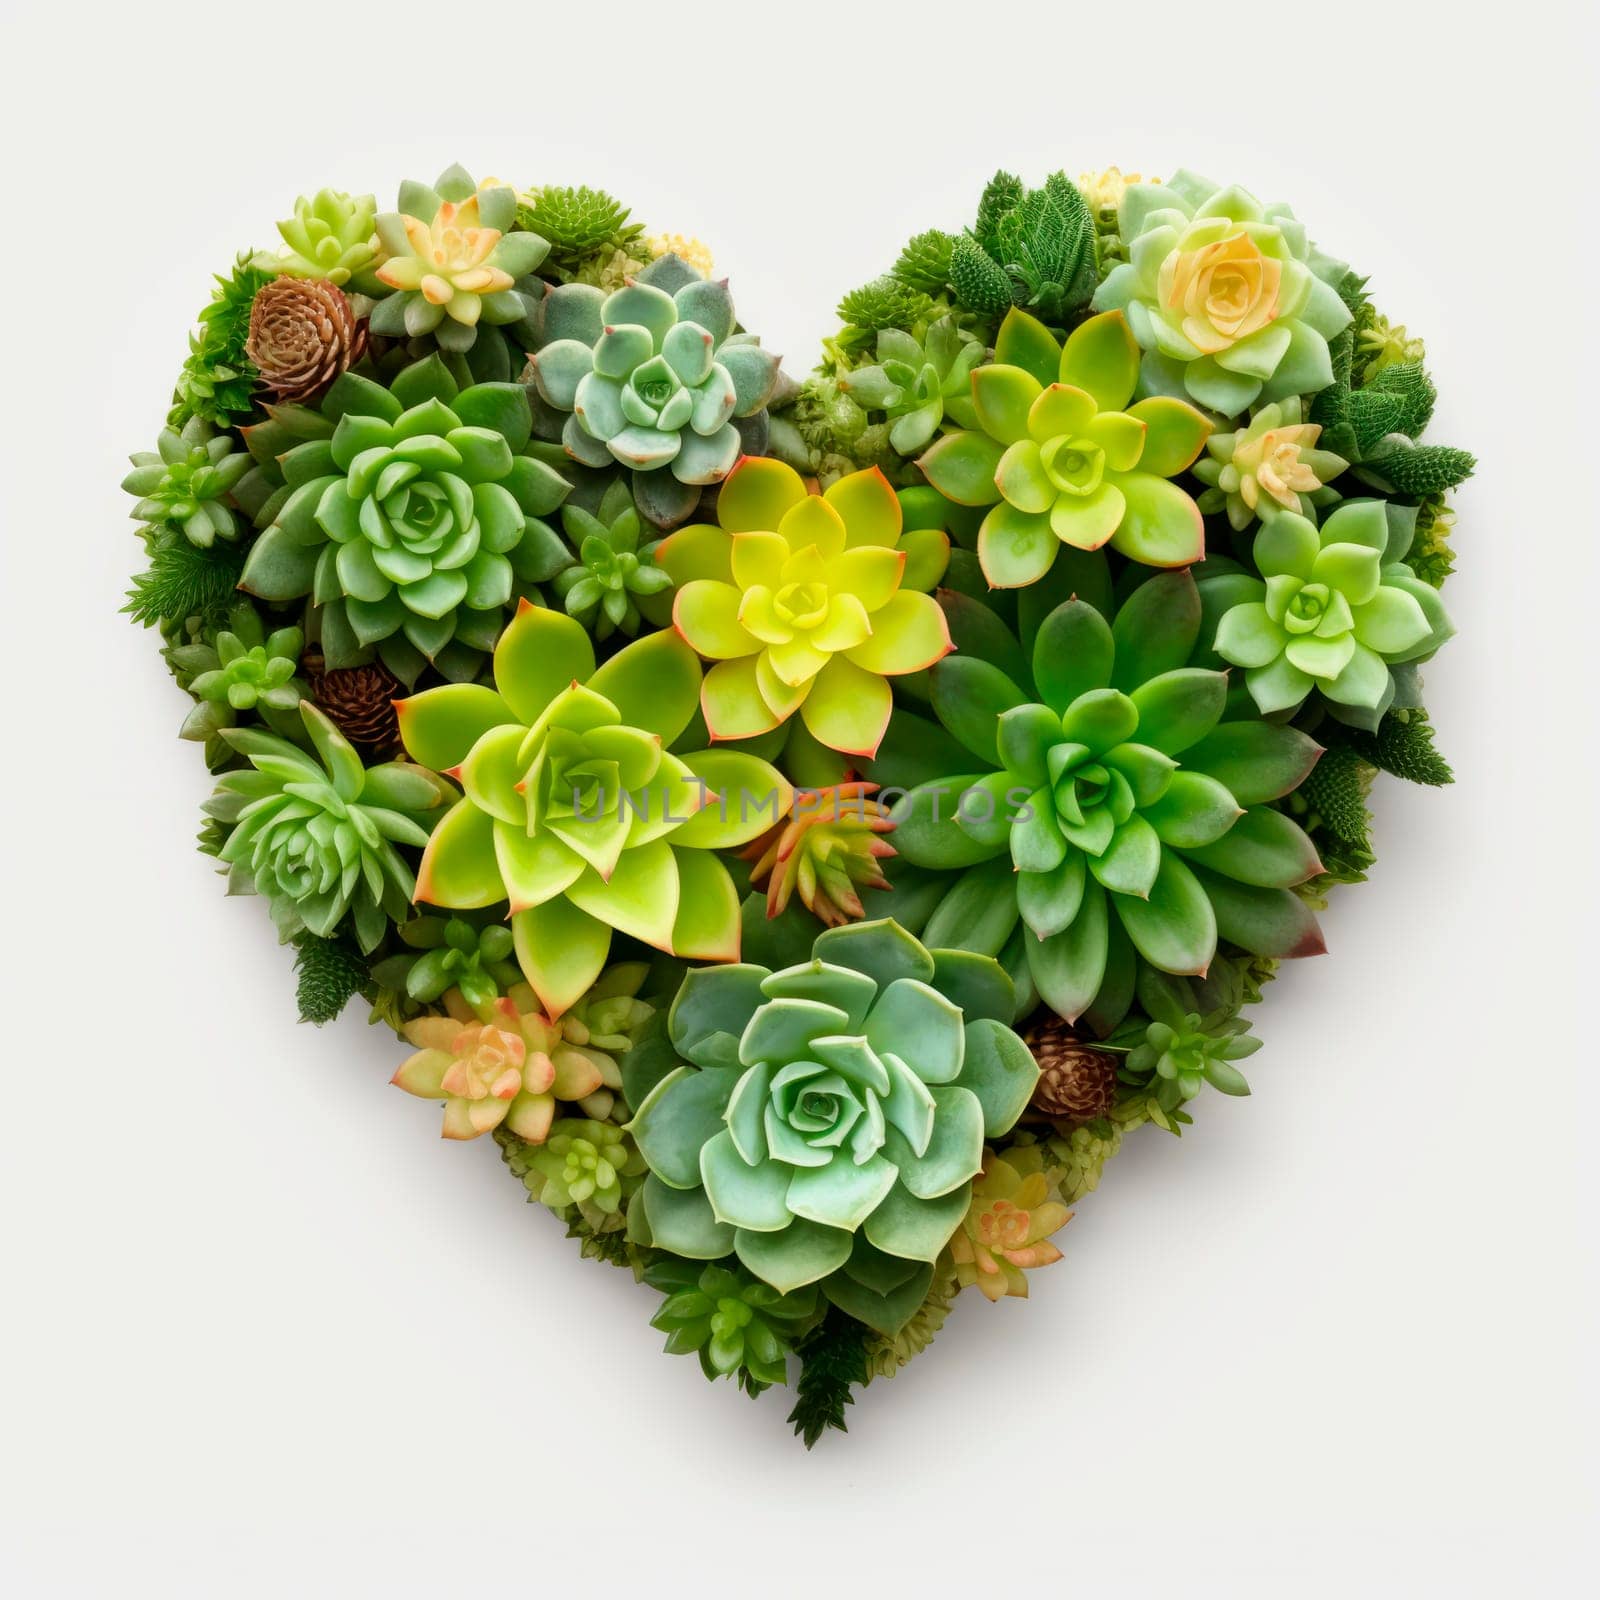 The heart is lined with beautiful succulents on a light background by Spirina